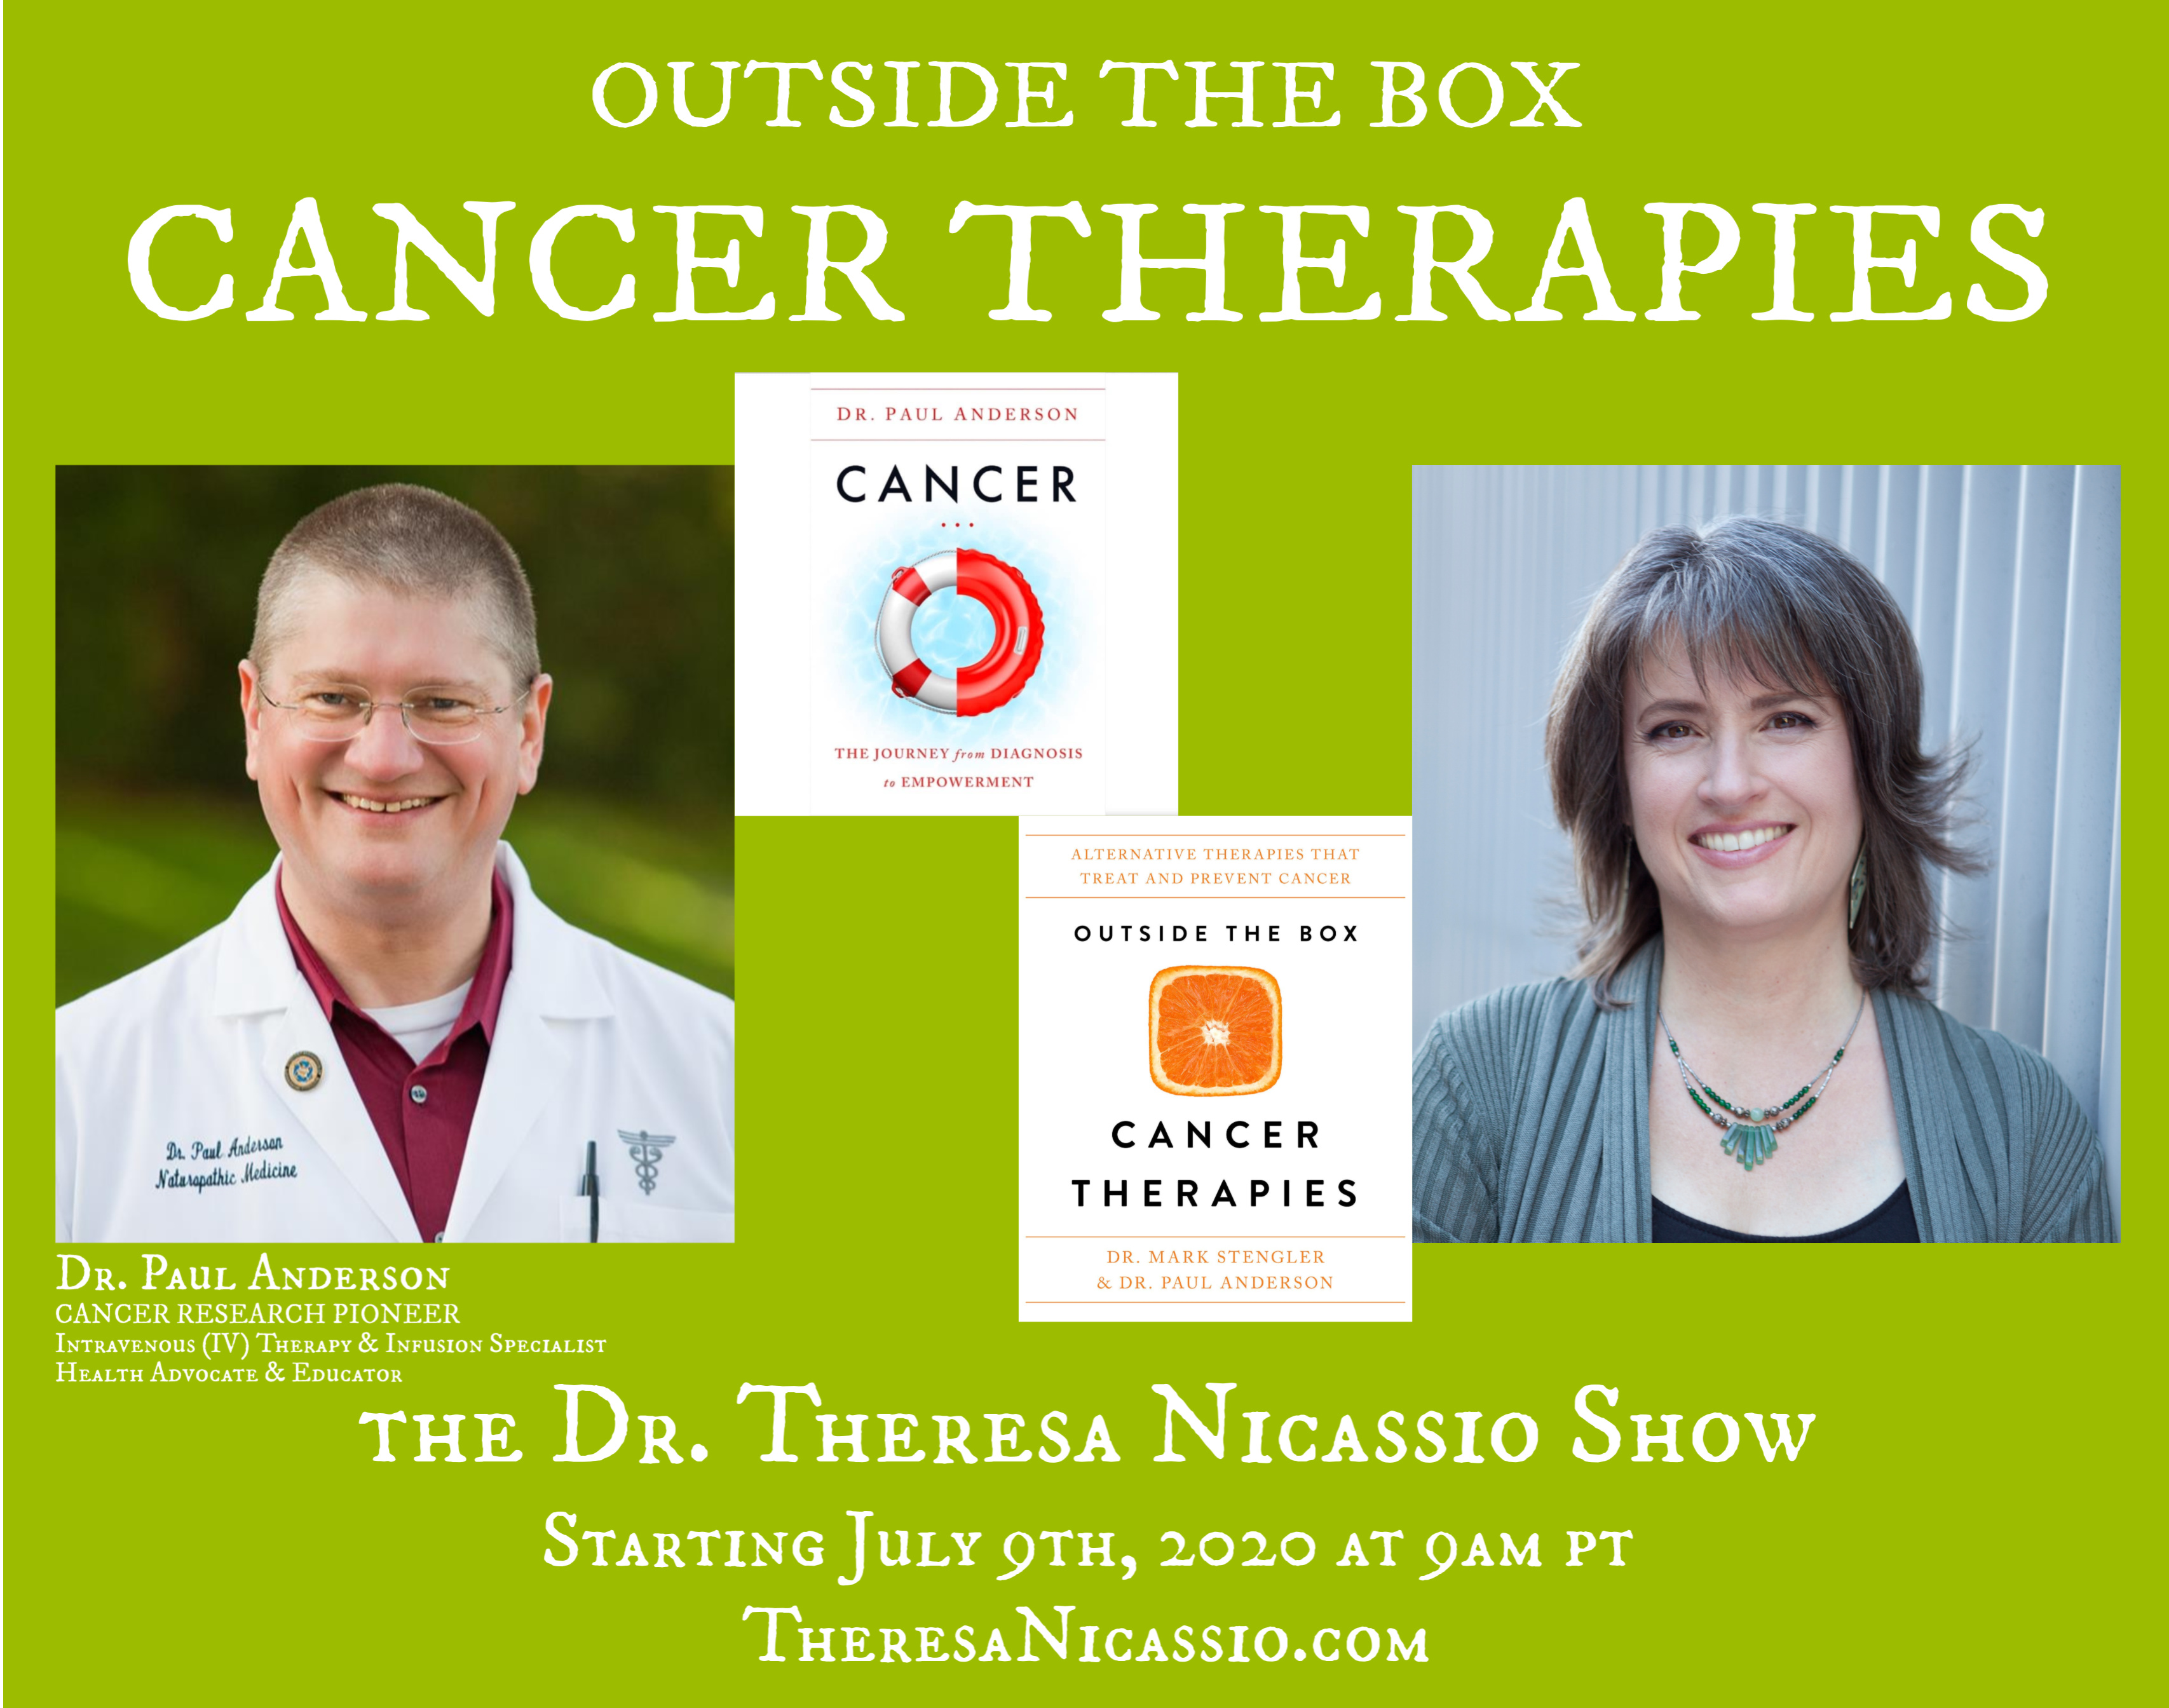 Well-known cancer researcher and former Chief of IV (intravenous therapy) Services for Bastyr Oncology Research Center Dr. Paul Anderson talks about cutting-edge CANCER THERAPIES on The Dr. Theresa Nicassio Show on Healthy Life Radio